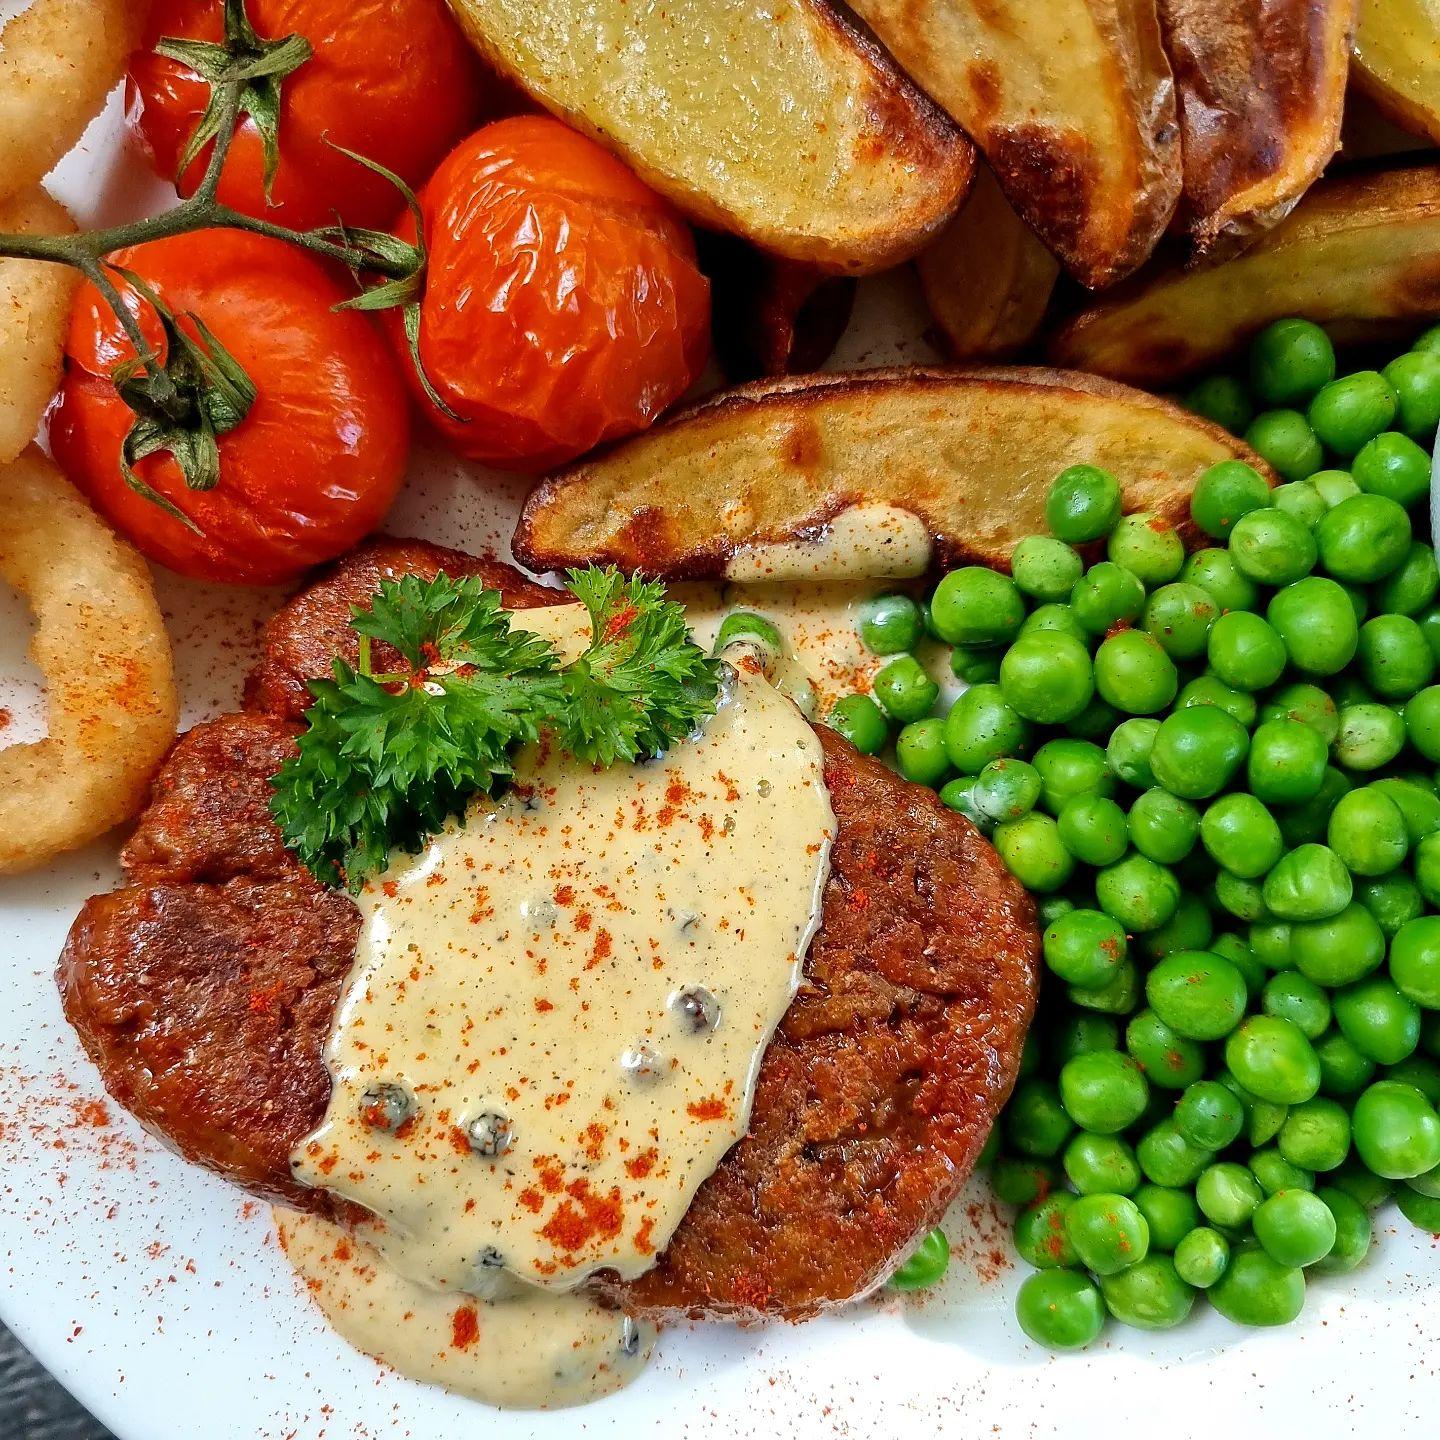 Steak with Peppercorn Sauce, Skins on Wedges, Grilled Vine Tomatoes & Peas